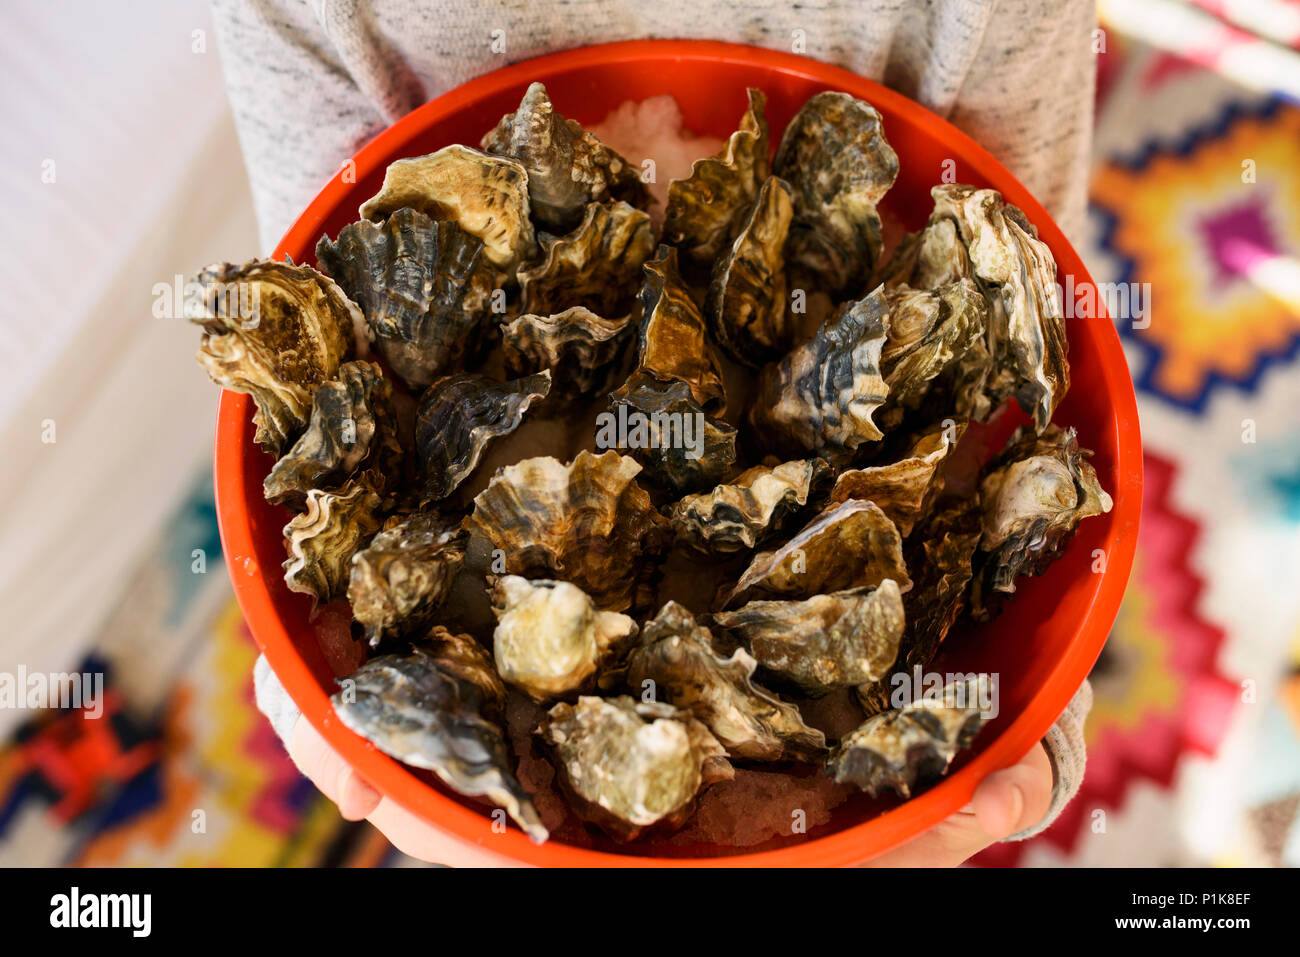 Child holding a bucket of fresh oysters Stock Photo